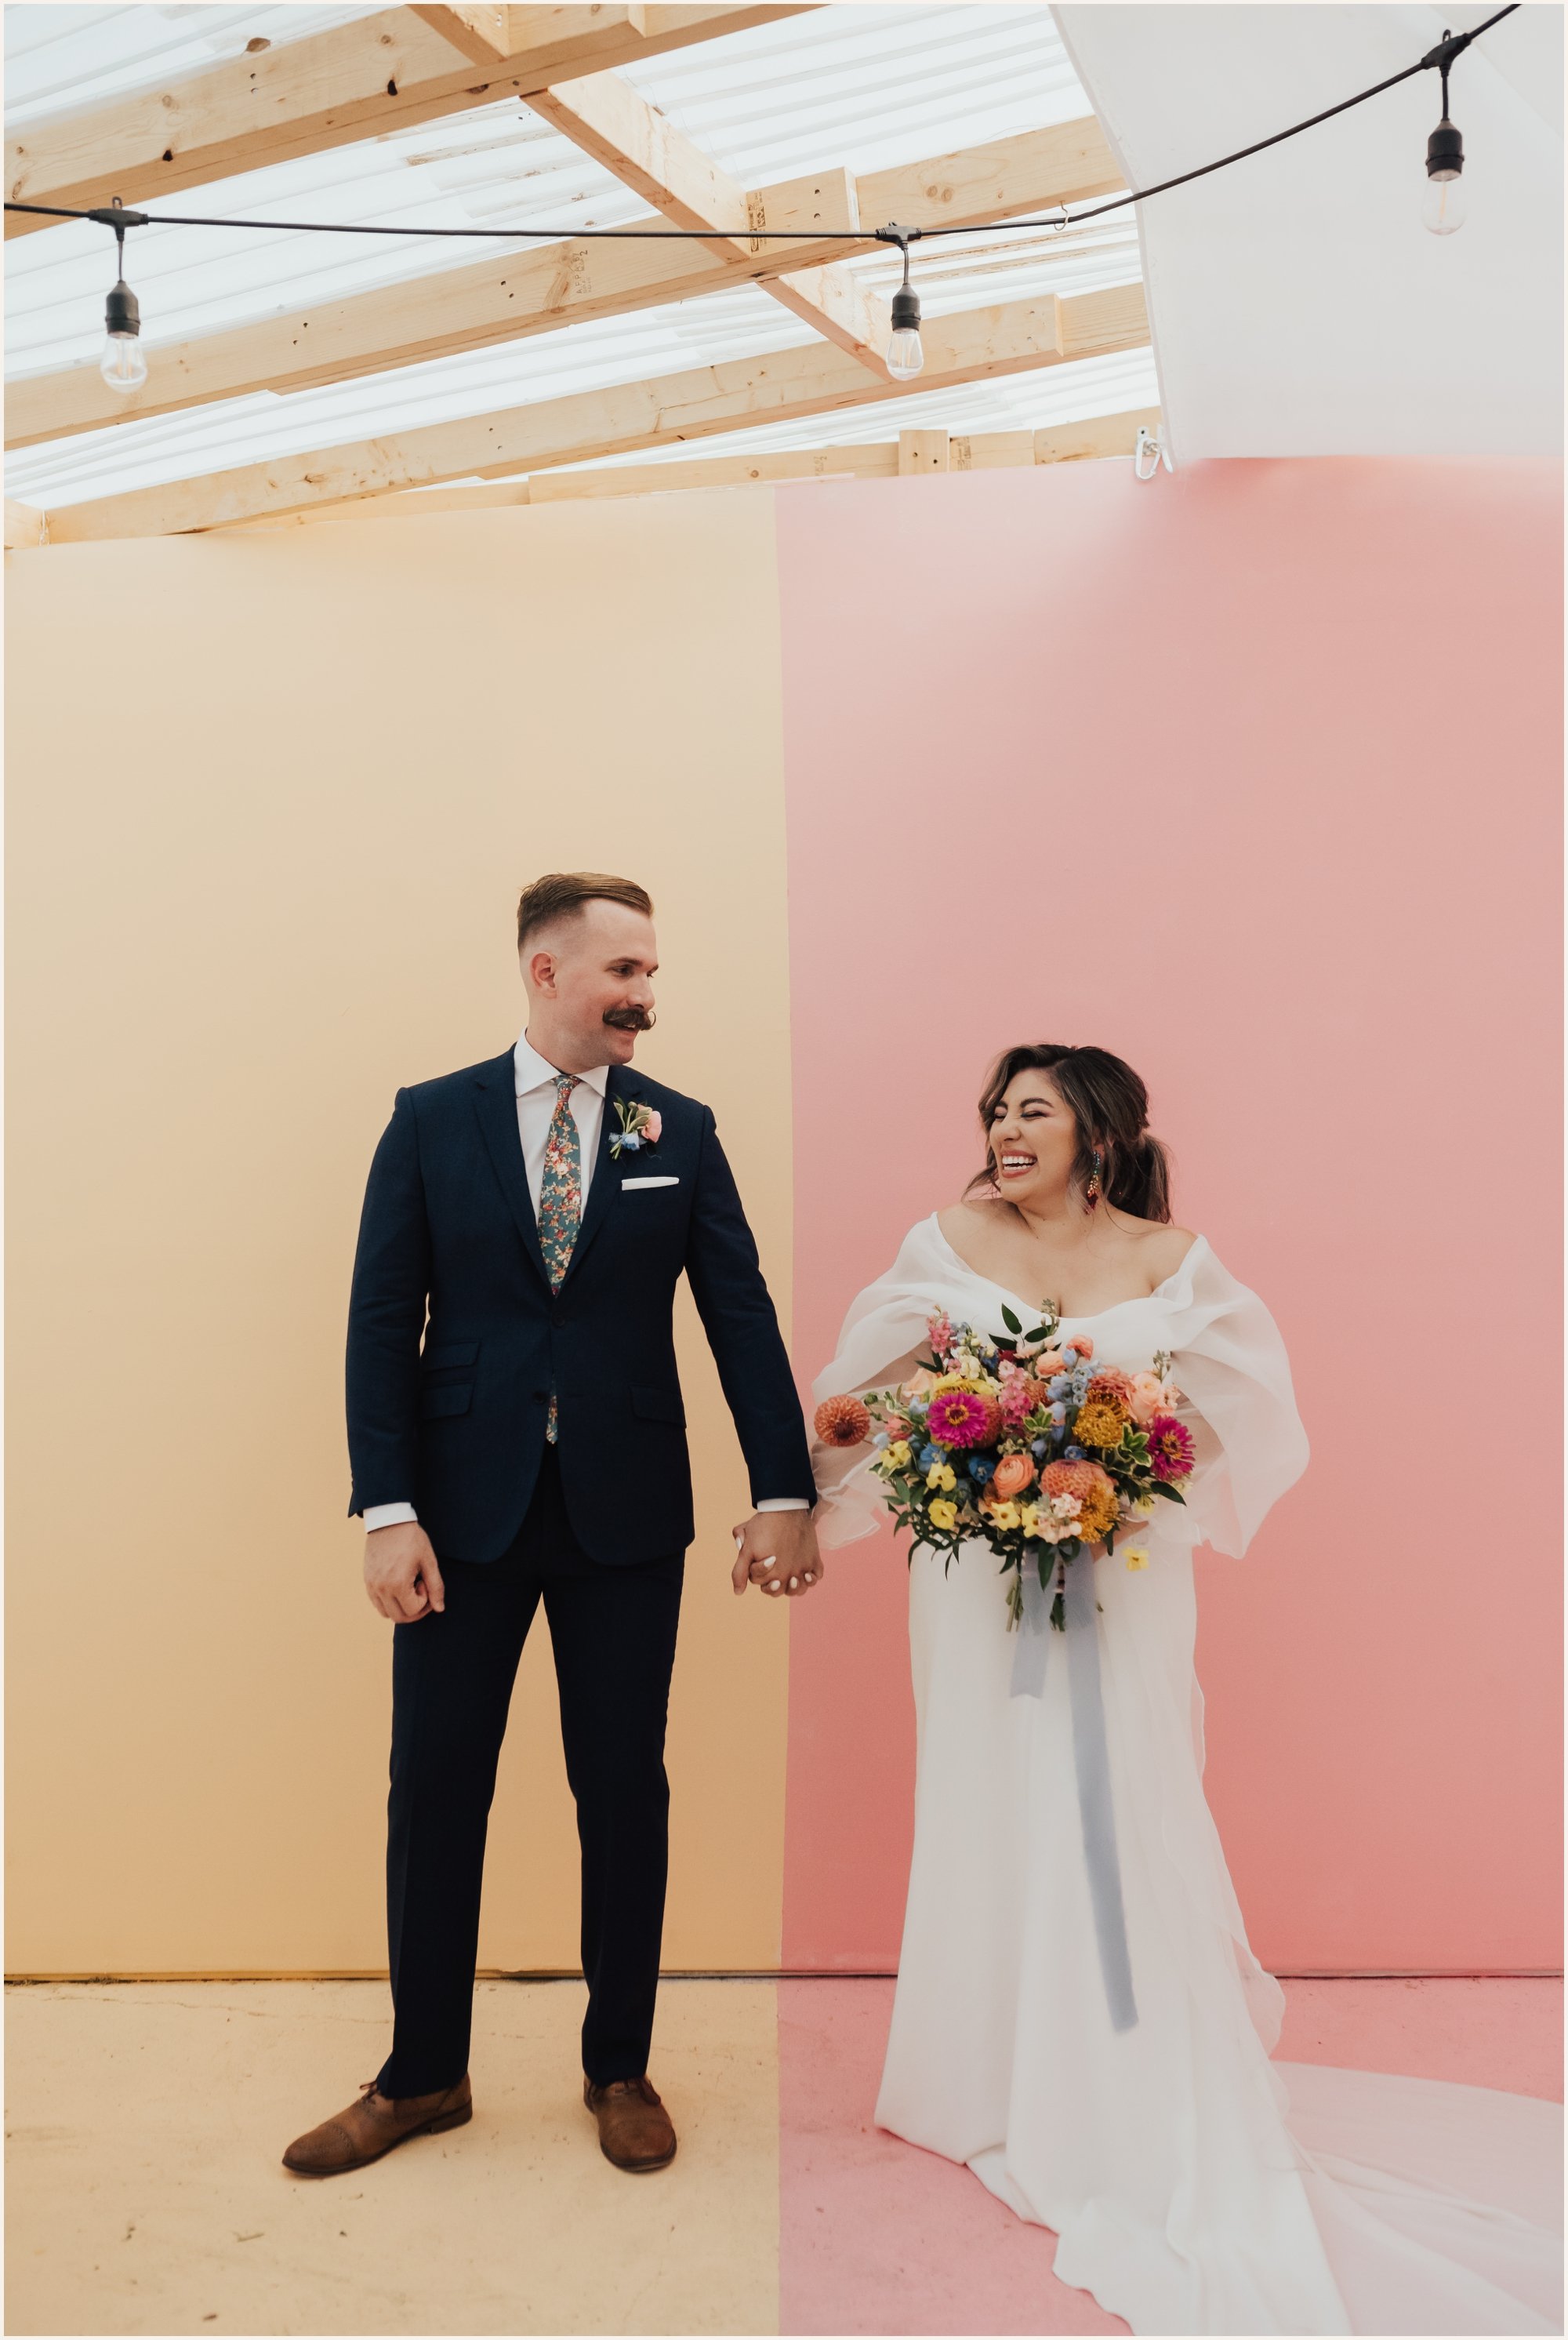 Couples Portraits at Colorful Wedding Styled Shoot | Lauren Parr Photography | Austin Based Wedding Photographer